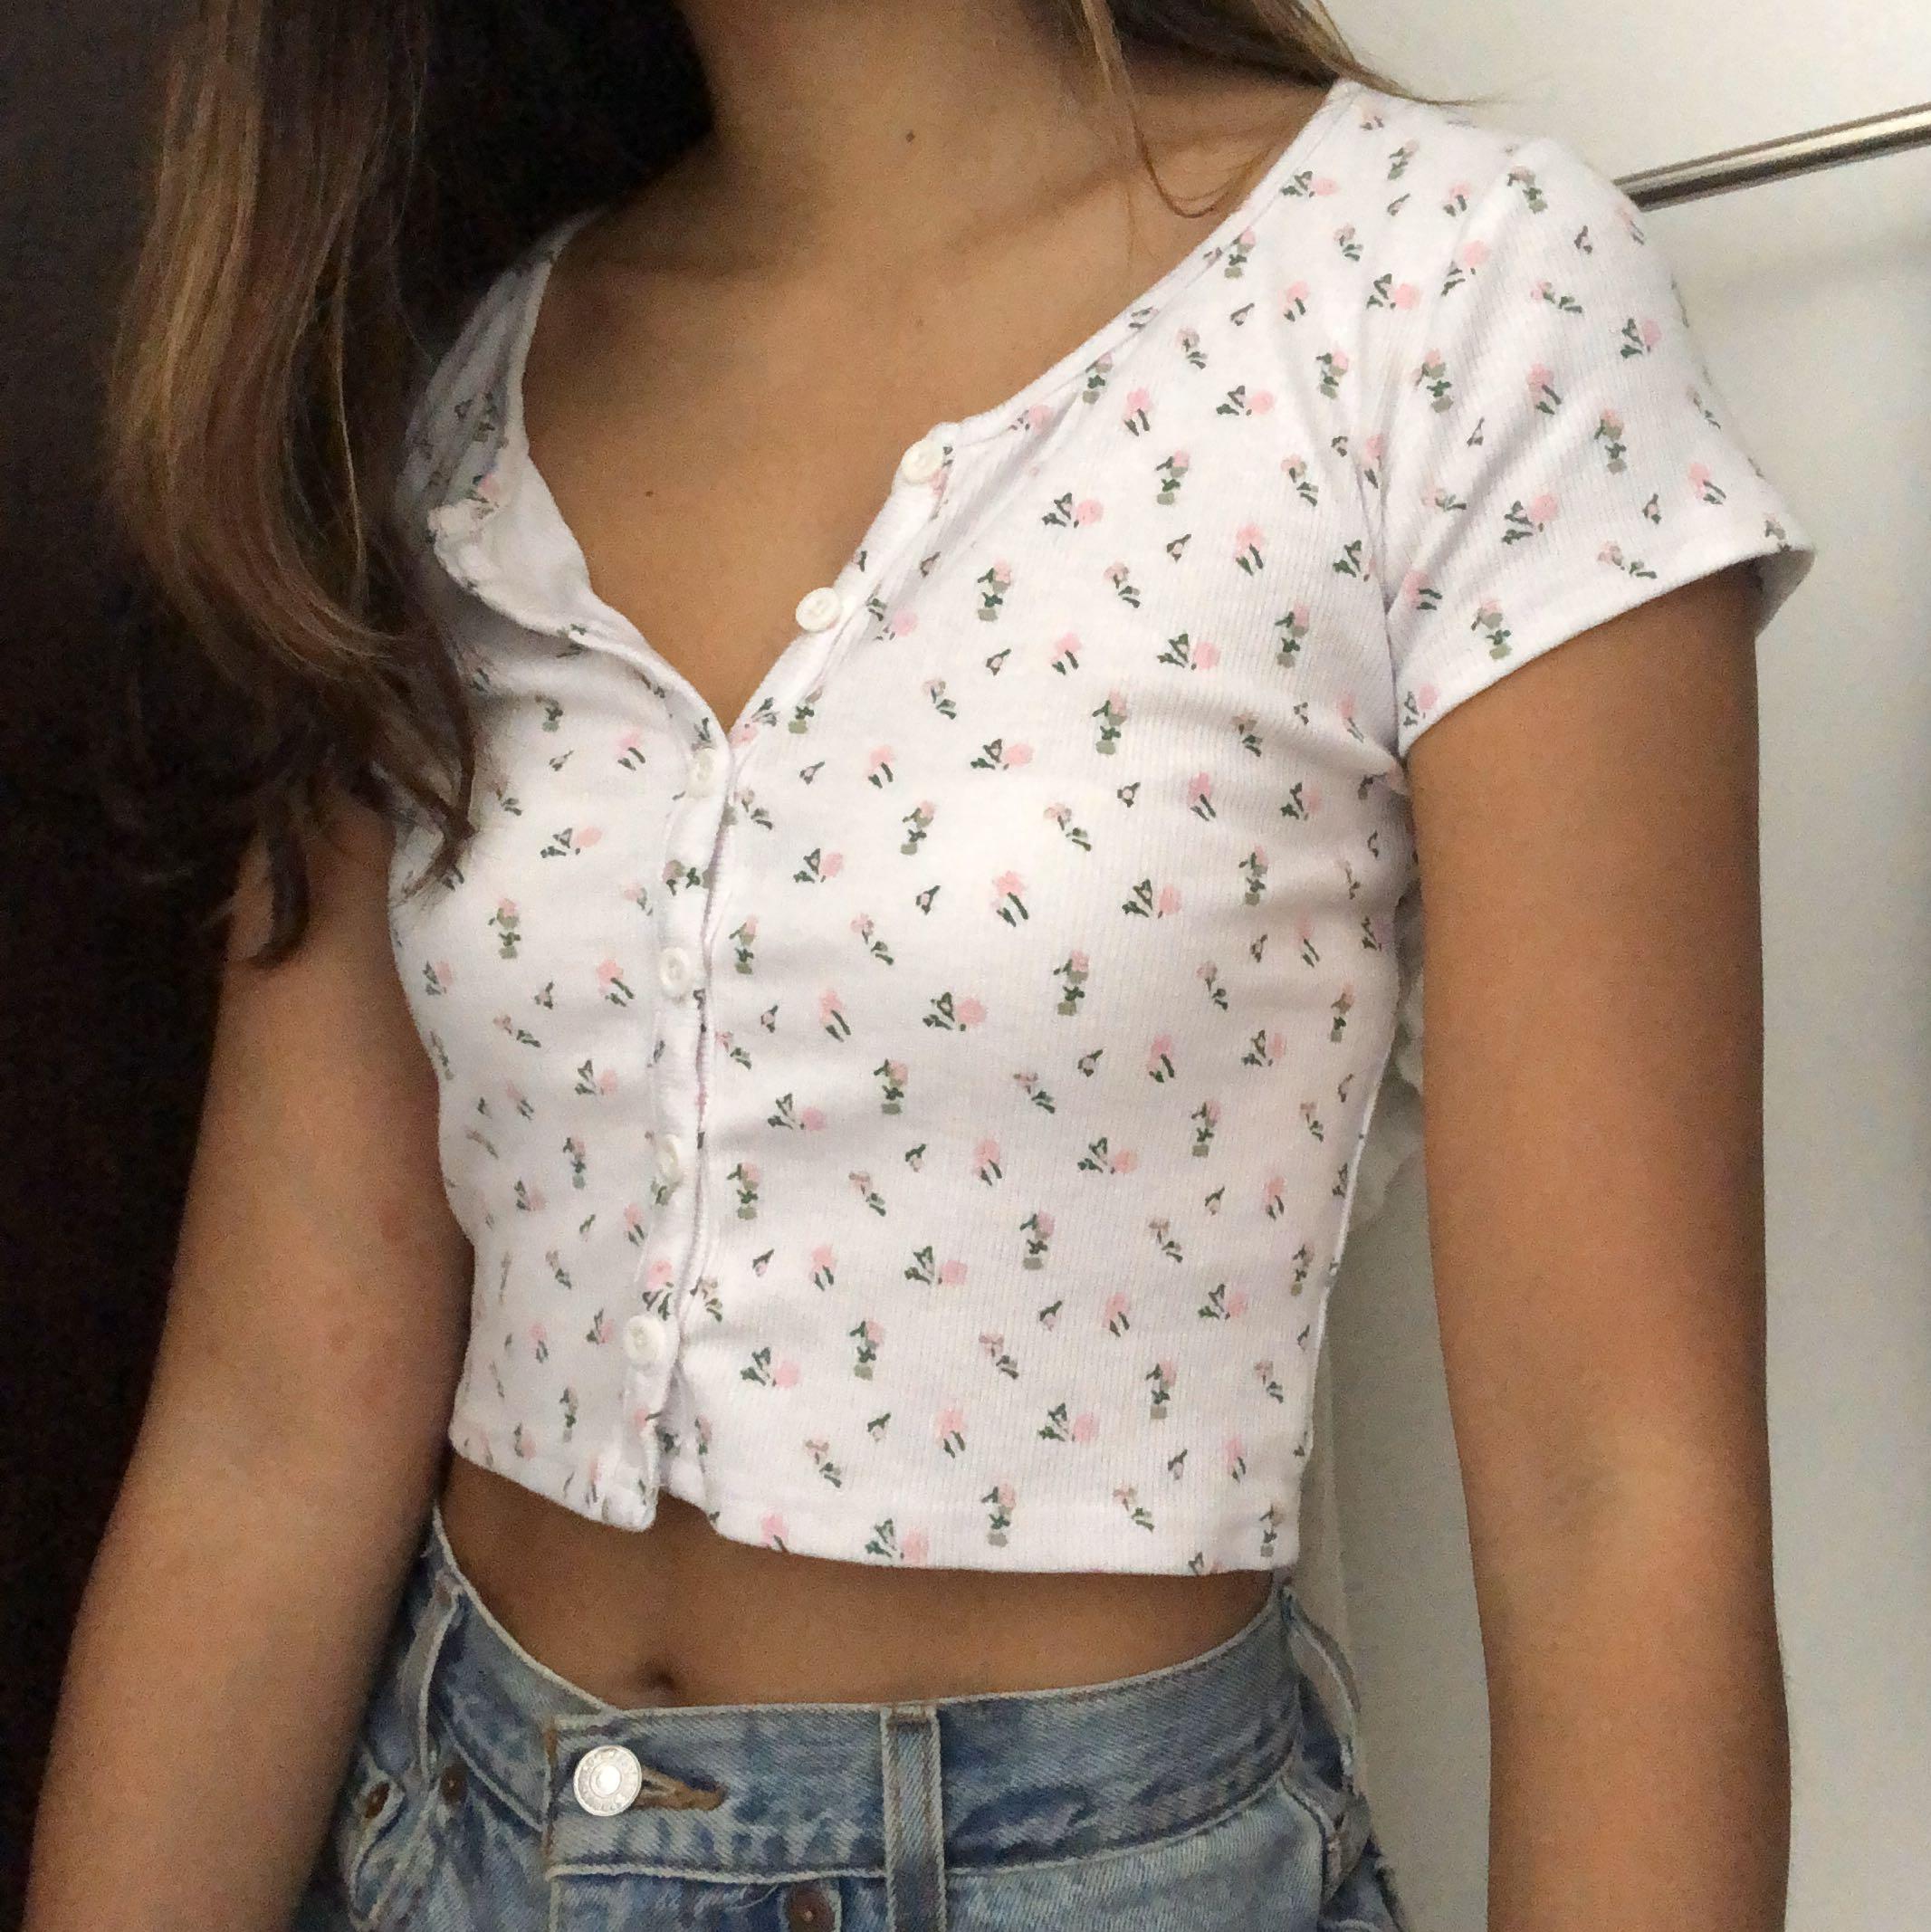 Brandy Melville Zelly Top Inspired Floral Button Up White Ribbed T Shirt Crop Top Women S Fashion Tops Sleeveless On Carousell